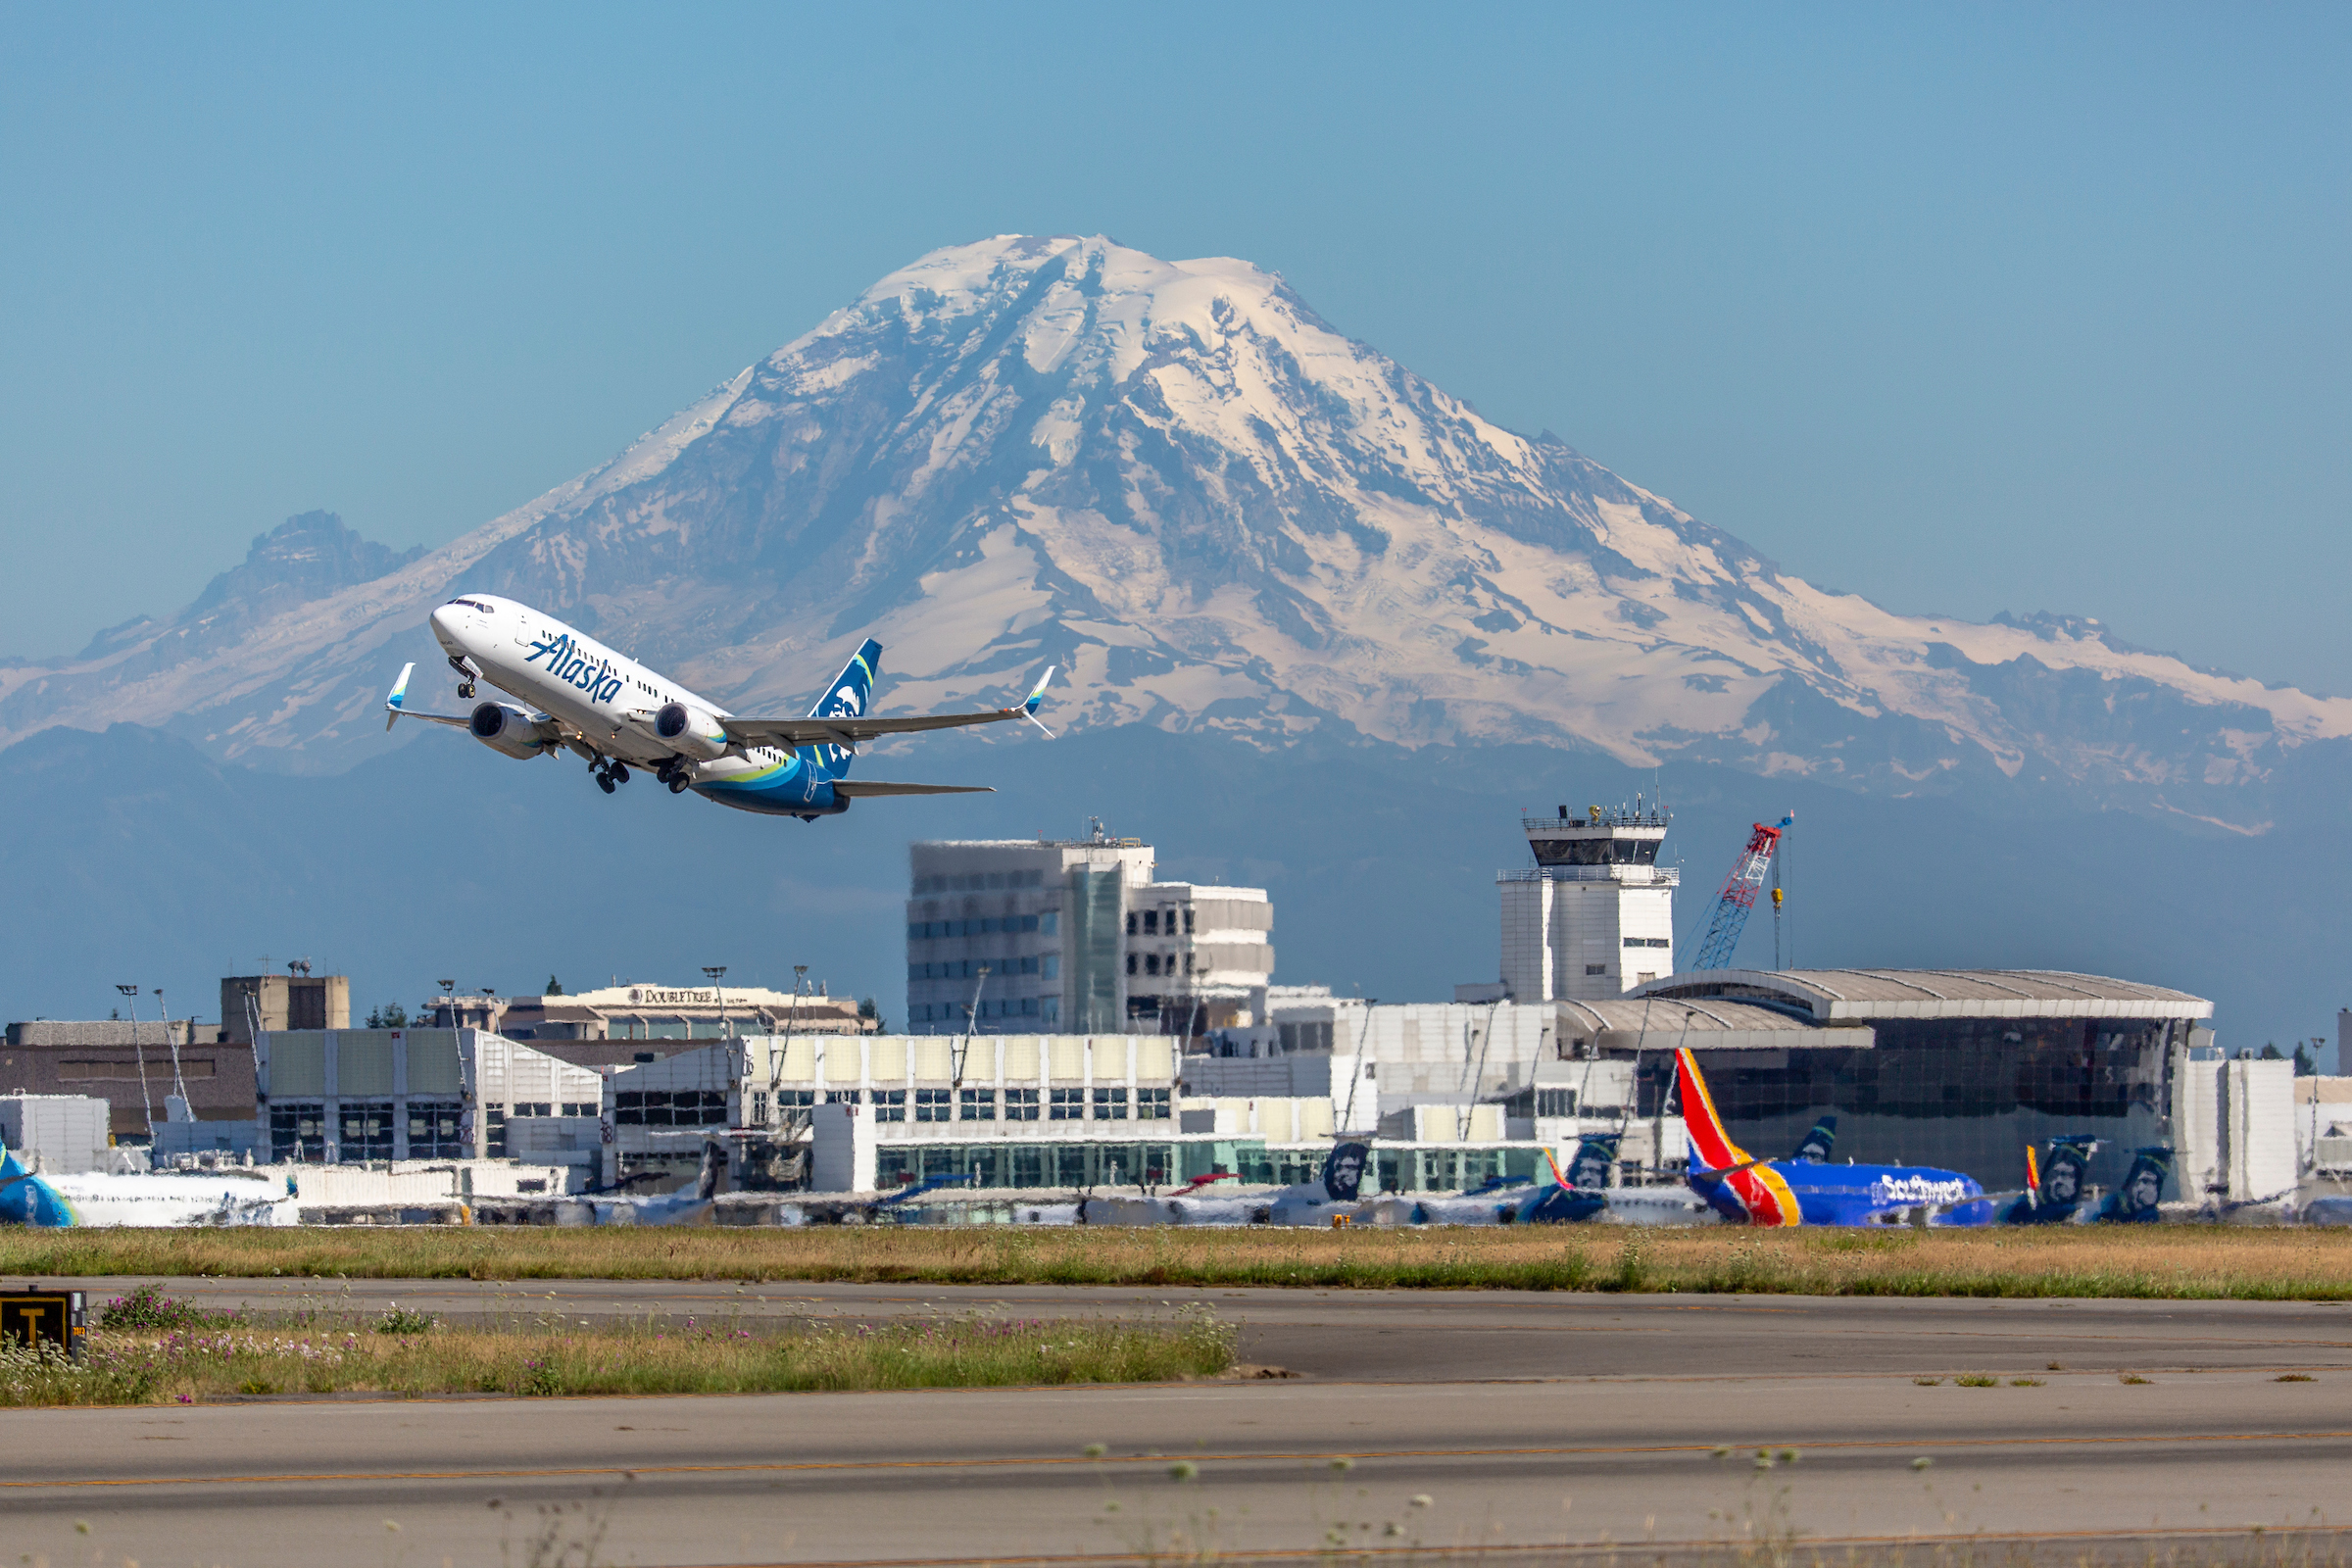 Alaska Airlines plane departing Sea-Tac with Mount Rainier in the background